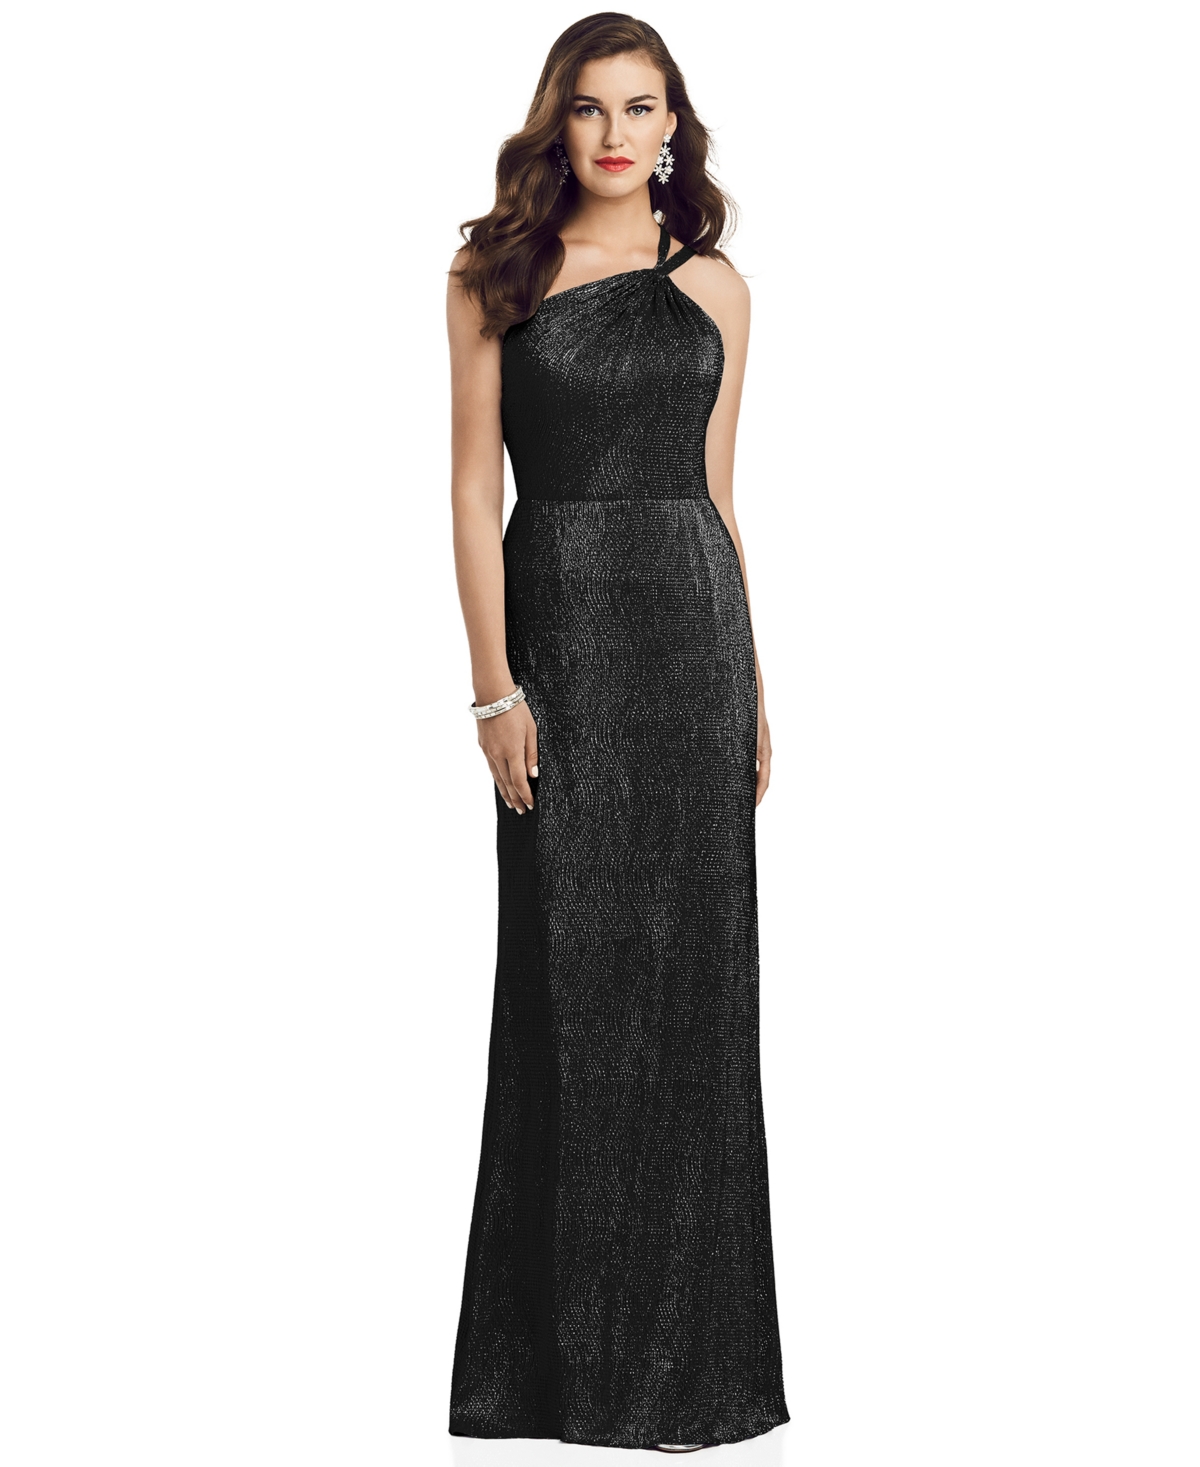 Dessy Collection One-Shoulder Metallic Gown